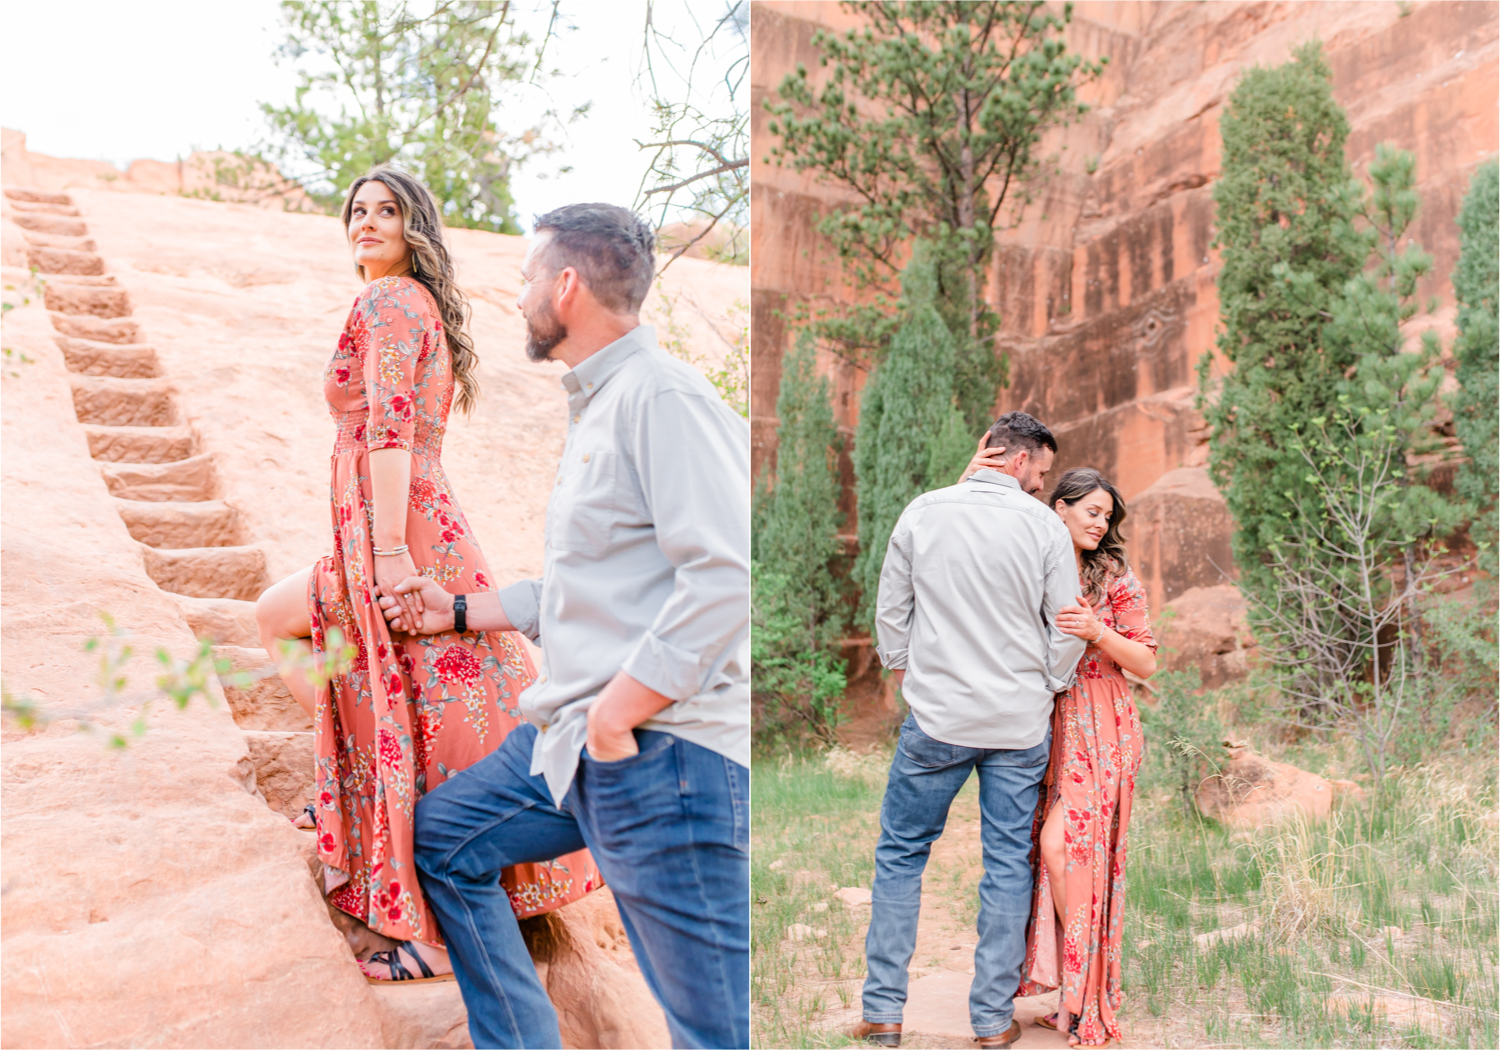 Romantic Summer Engagement at Red Rock Canyon Park in Colorado Springs | Britni Girard Photography Colorado Wedding Photographer and Videographer | Floral Dress, Green Dress, Grassy Fields, Rustic Boho Engagement